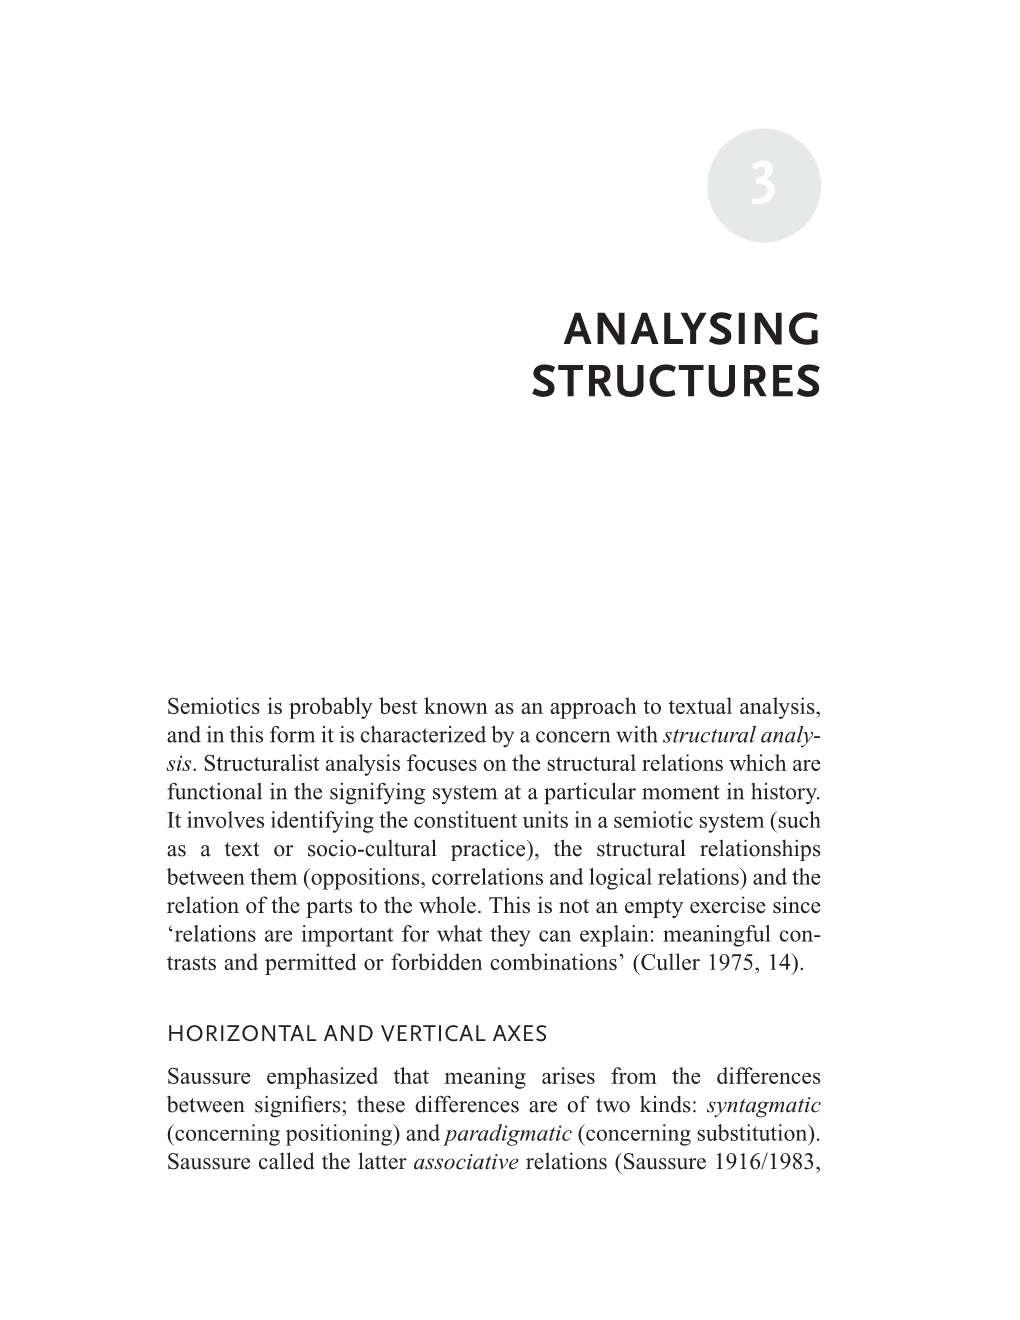 03 Analysing Structures